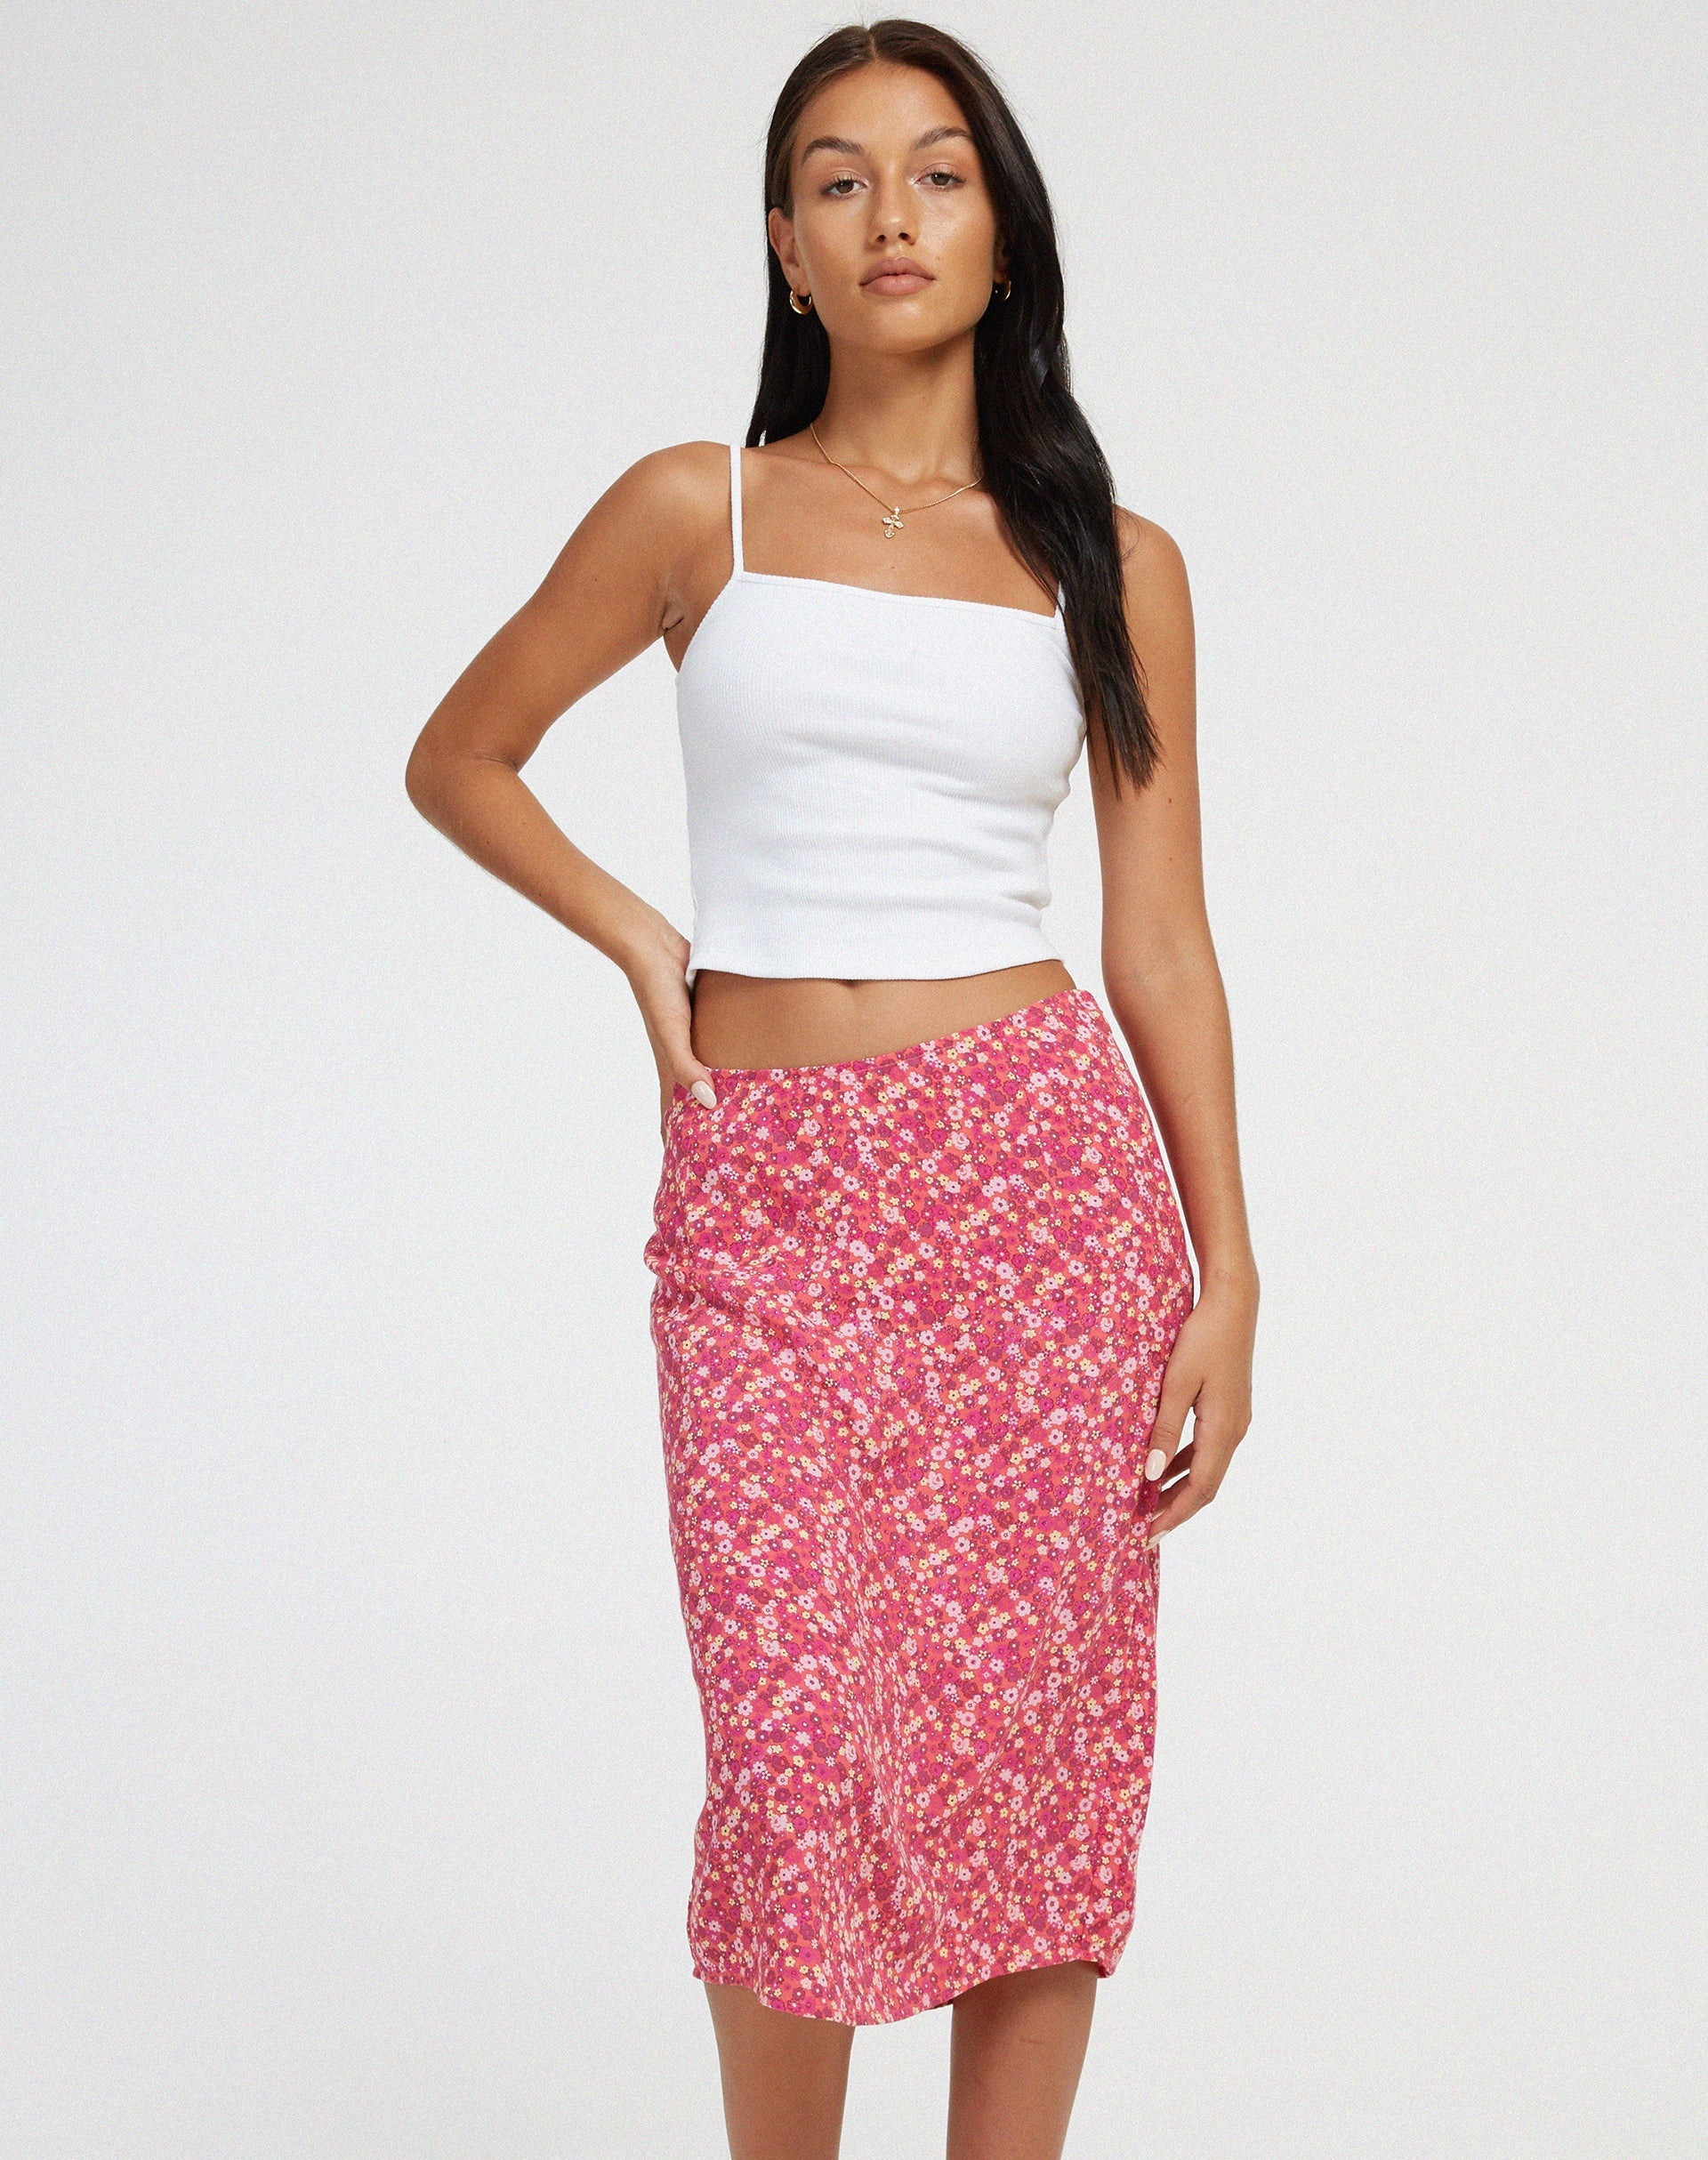 image of Harriet Midi Skirt in Ditsy Floral Pink